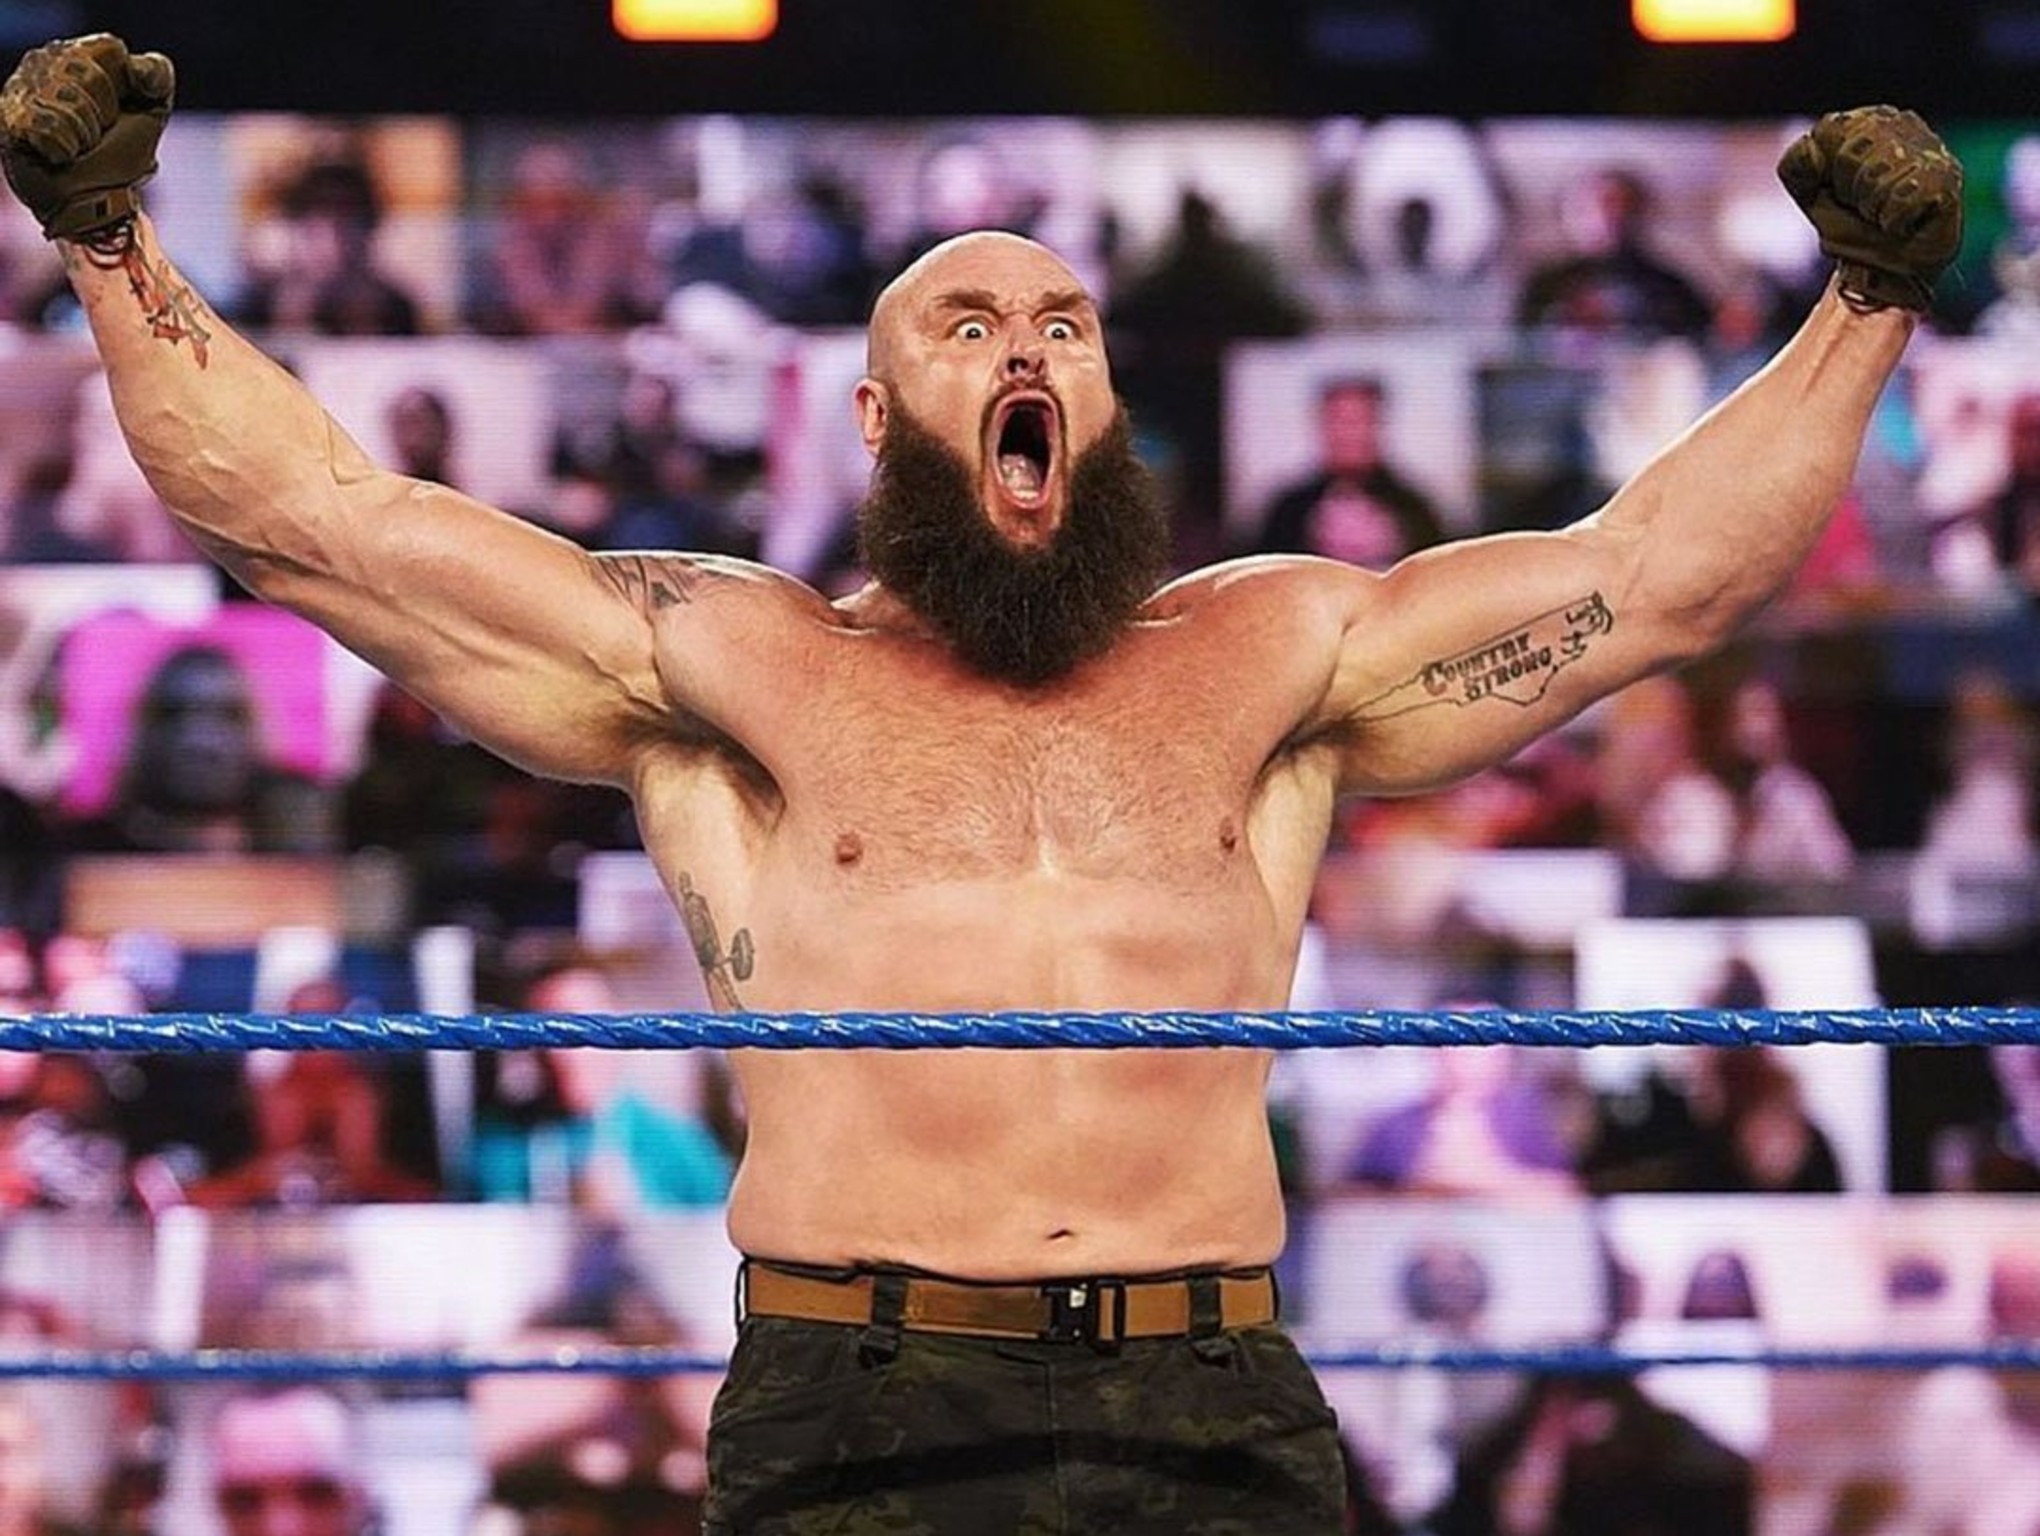 Wwe Smackdown Results Grades Braun Strowman Returns And Raw Invades Before Royal Rumble Nestia